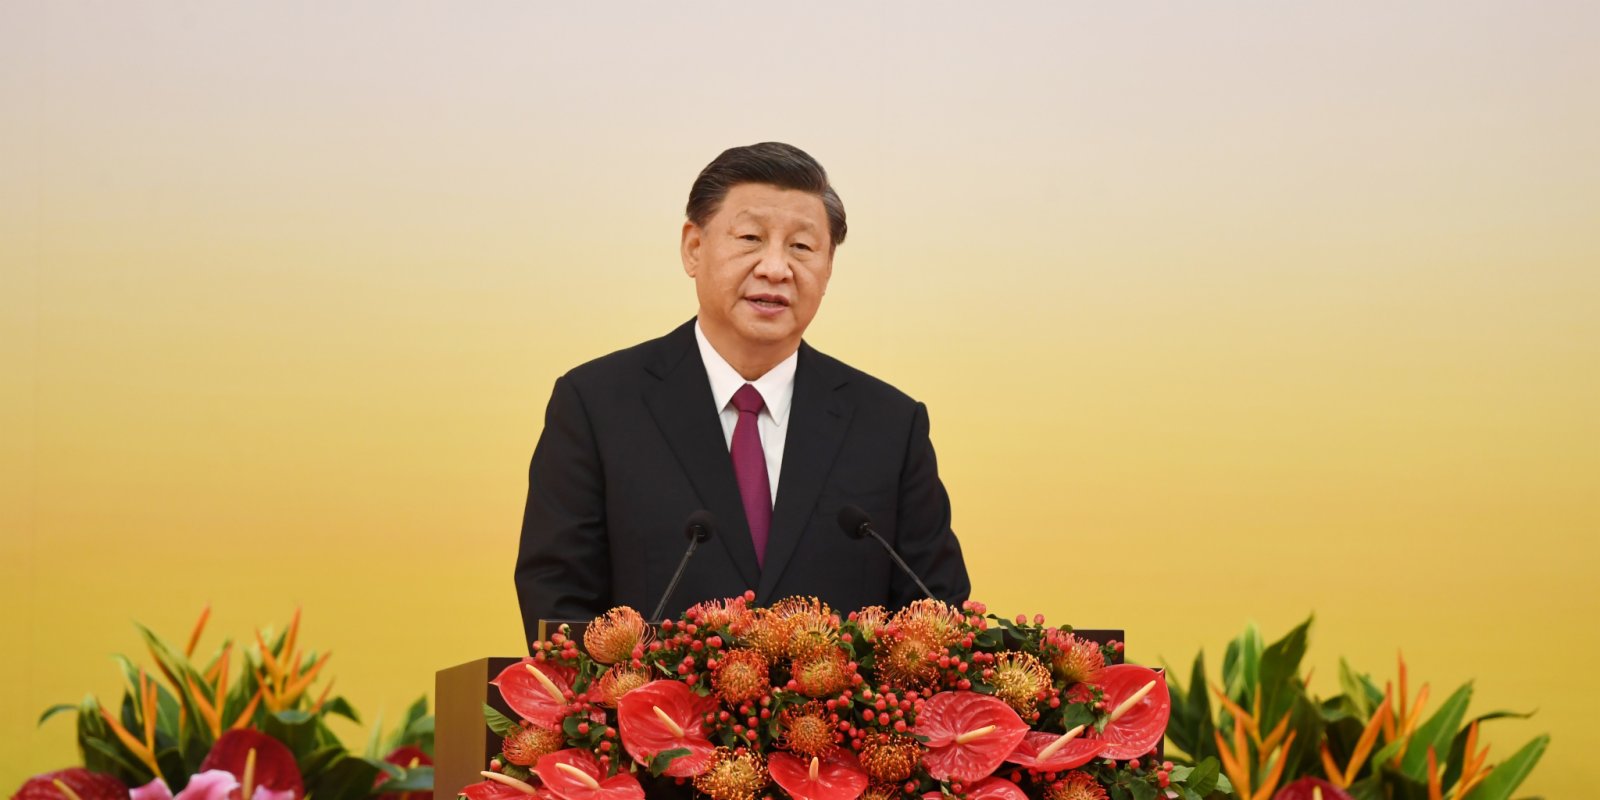 President Xi hopes Hong Kong people will jointly uphold harmony, stability